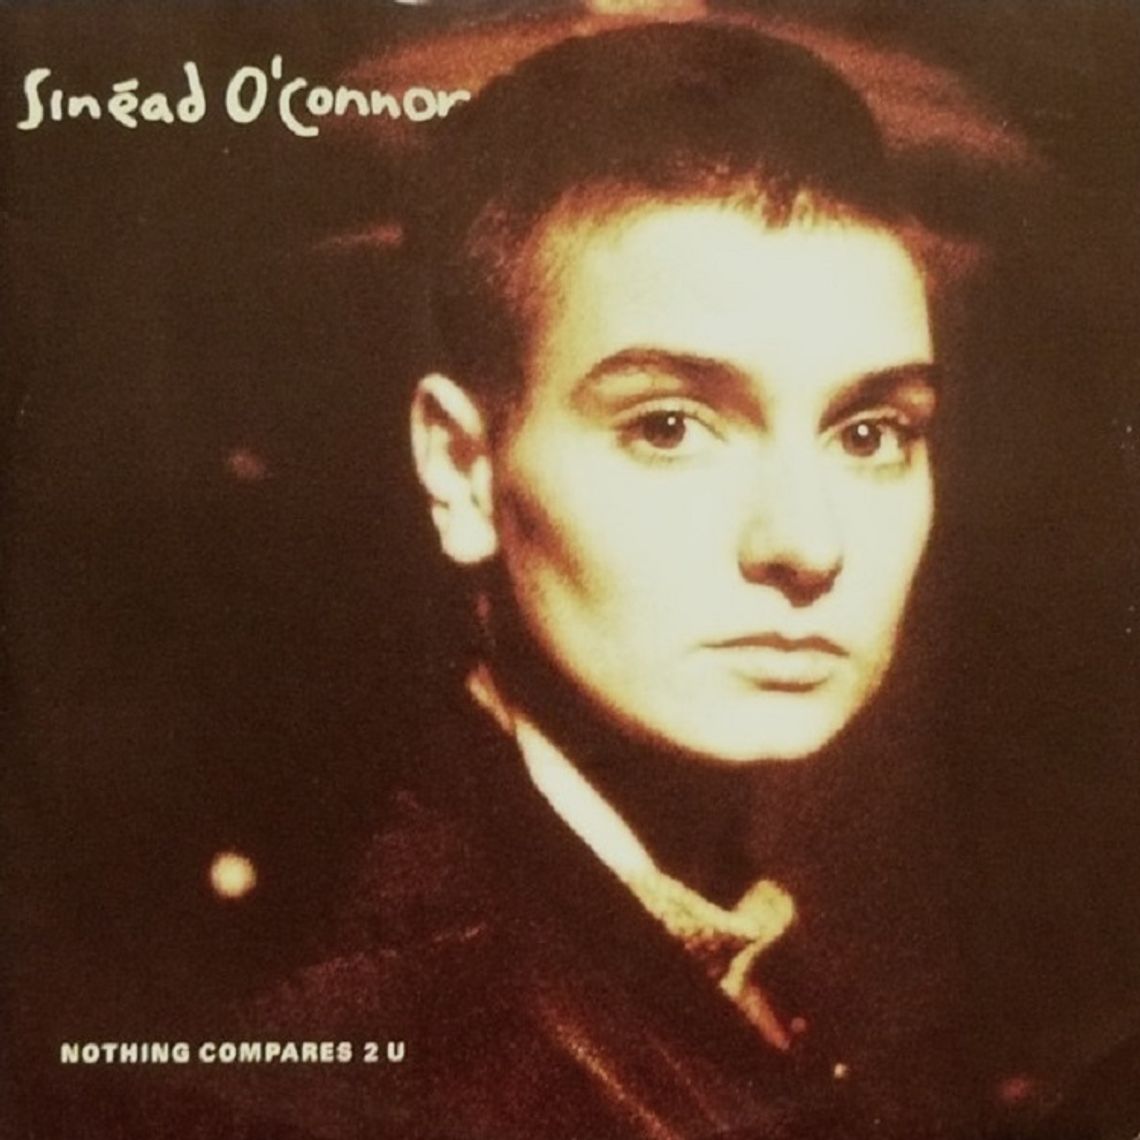 SINEAD O'CONNOR "Nothing compares 2 U"